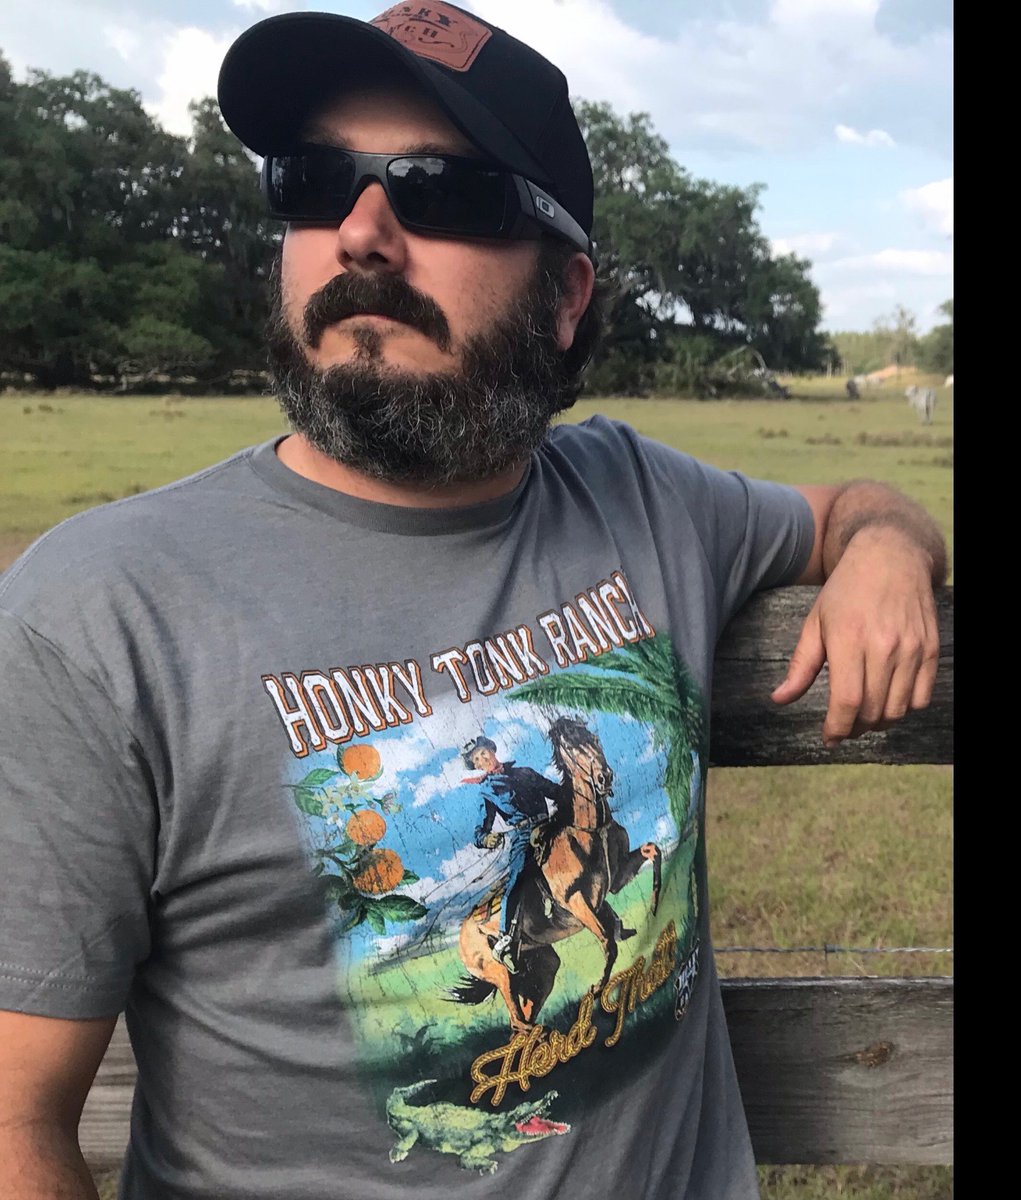 ☀️ Summers here and we’ve got t-shirts for everybody. Check out the links below...
#BellamyBrothers #OldHippieStash #HonkyTonkRanch bit.ly/BBNewMerch2021 & bit.ly/HTRNewMerch2021